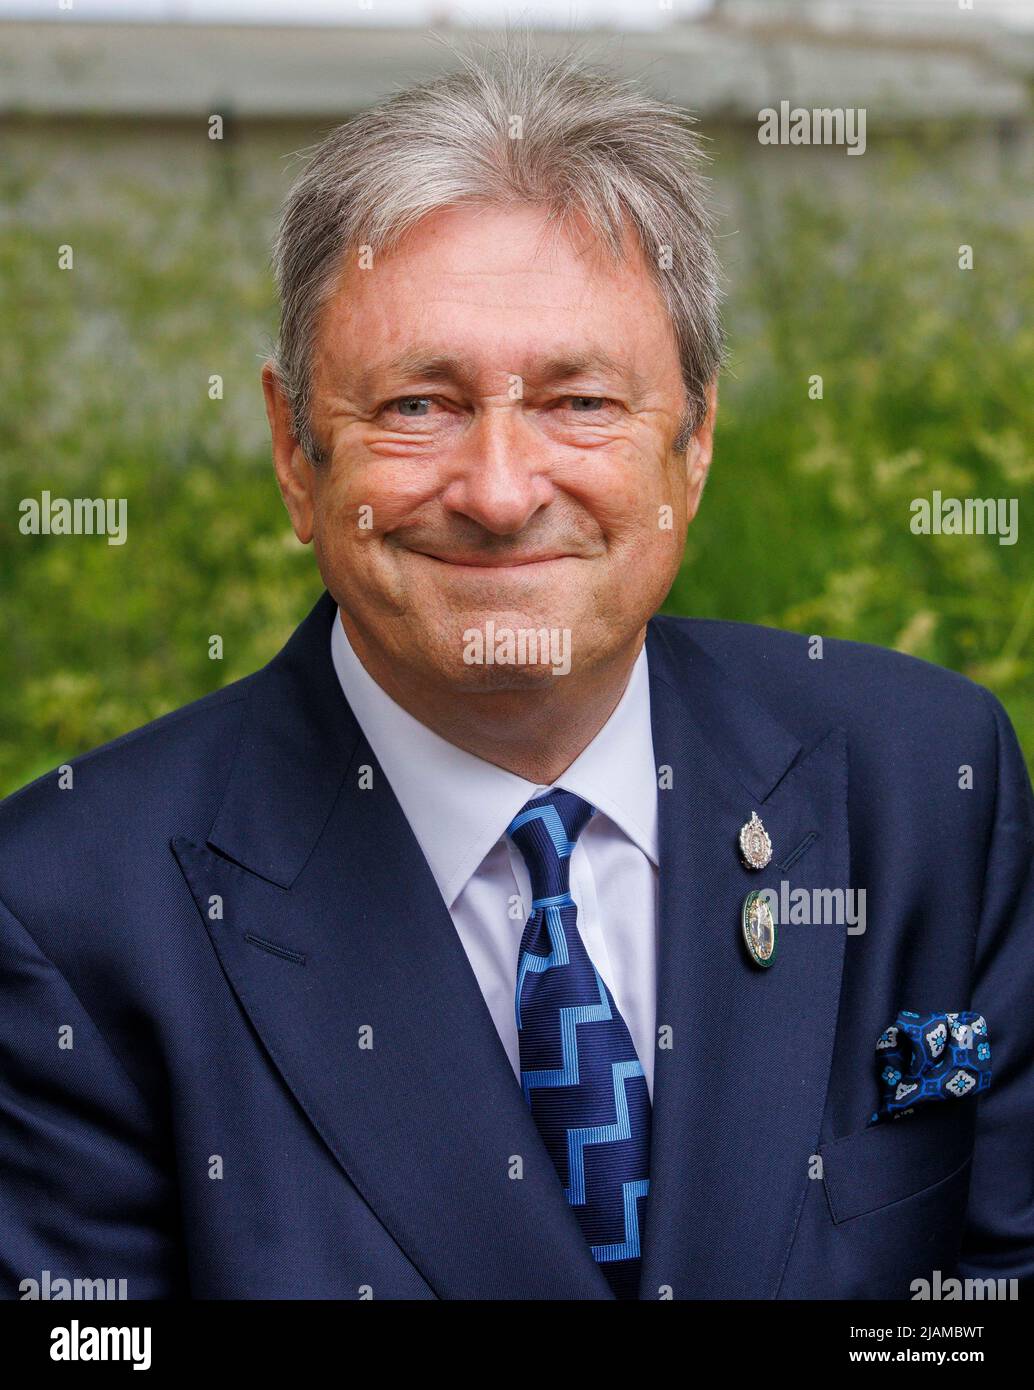 Alan Titchmarsh, English gardener, broadcaster, Television presenter, poet and novelist, at the RHS Chelsea Flower Show. Stock Photo